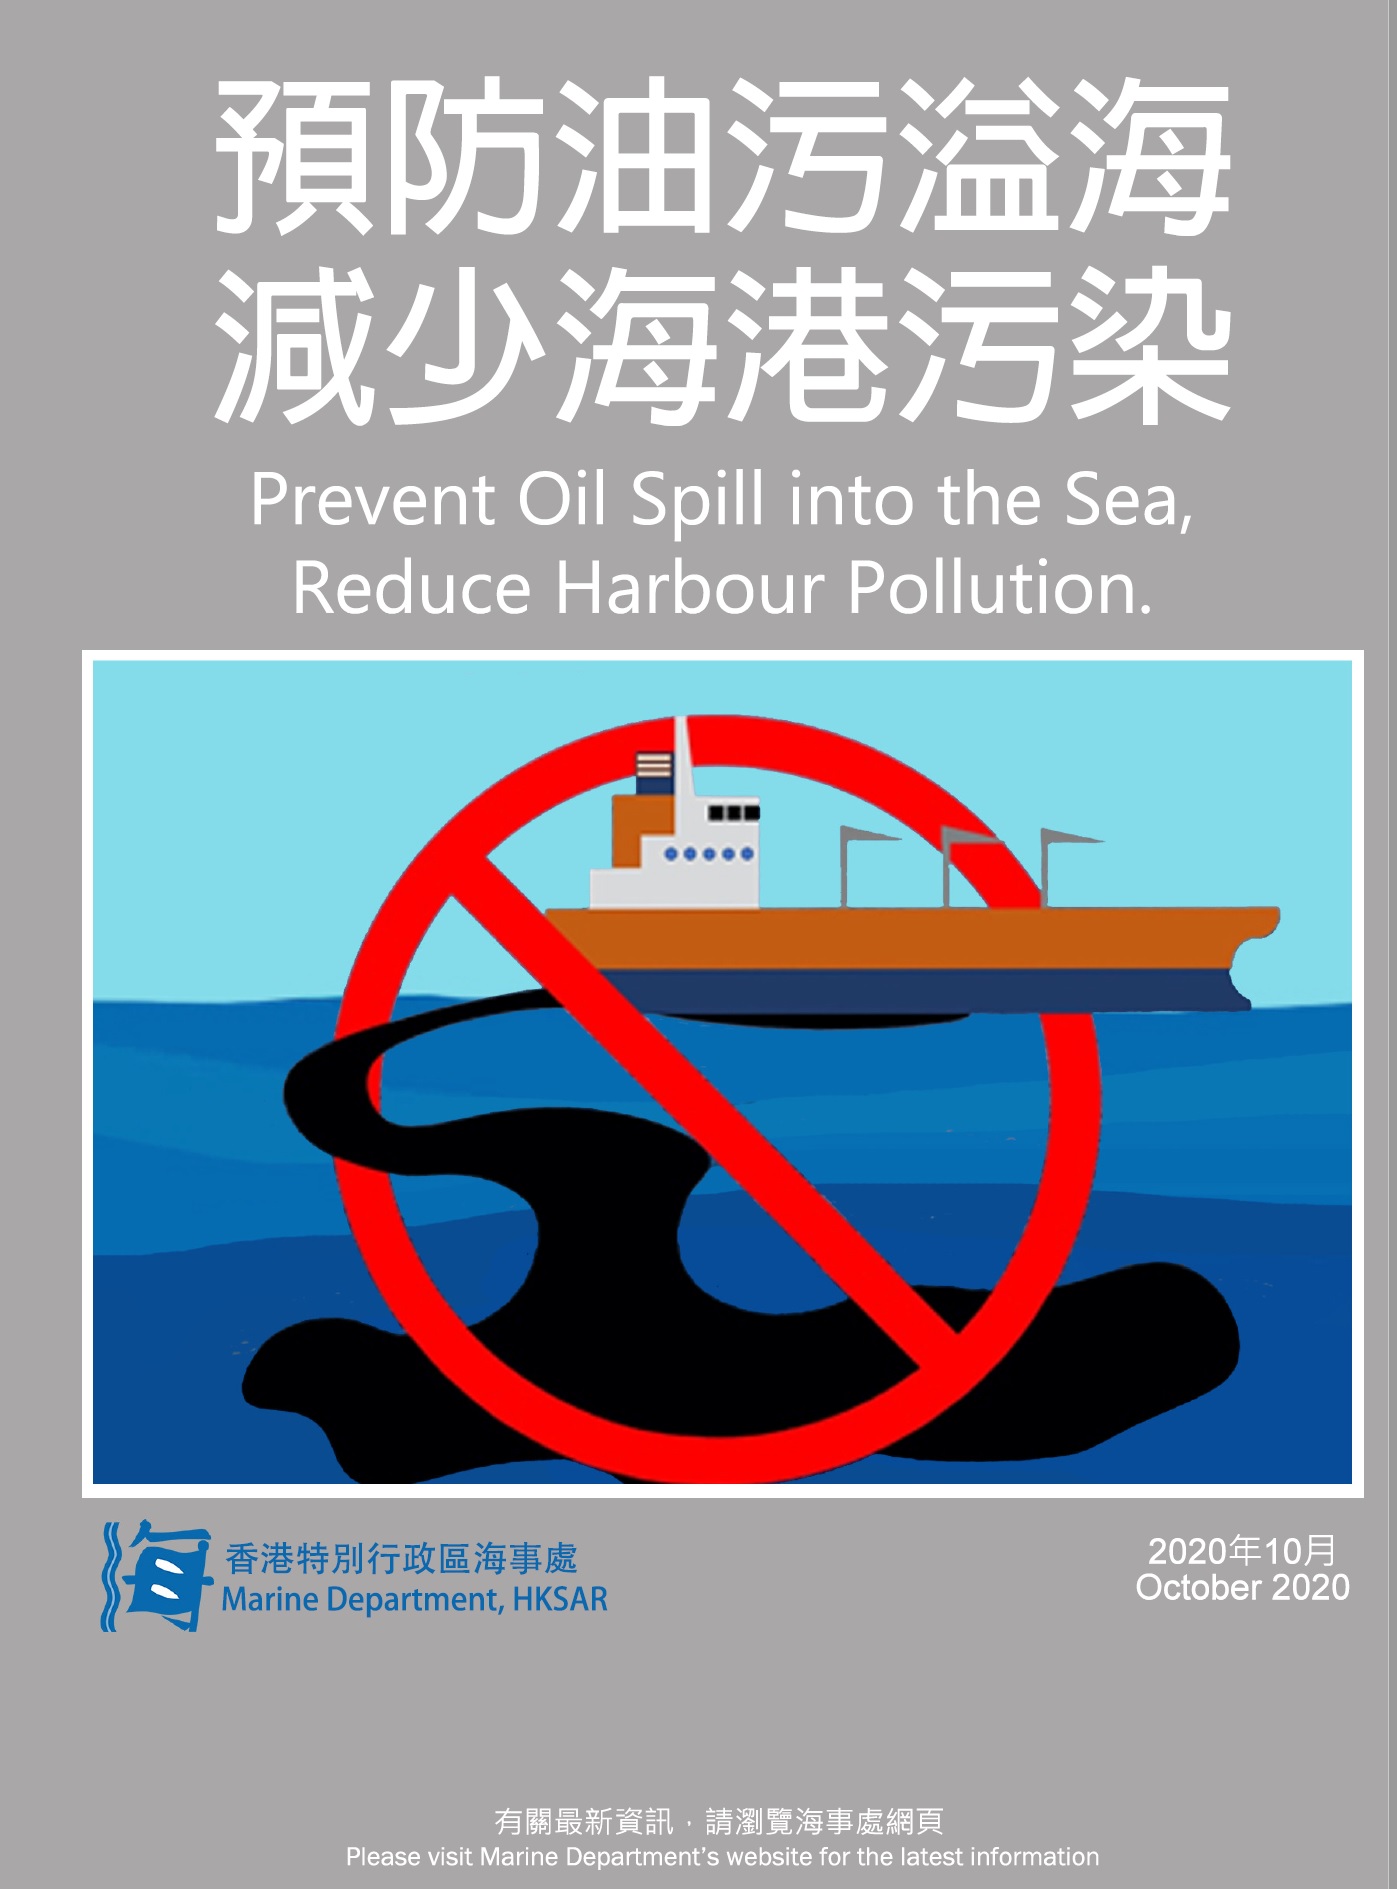 Prevent Oil Spill into the Sea, Reduce Habour Pollution